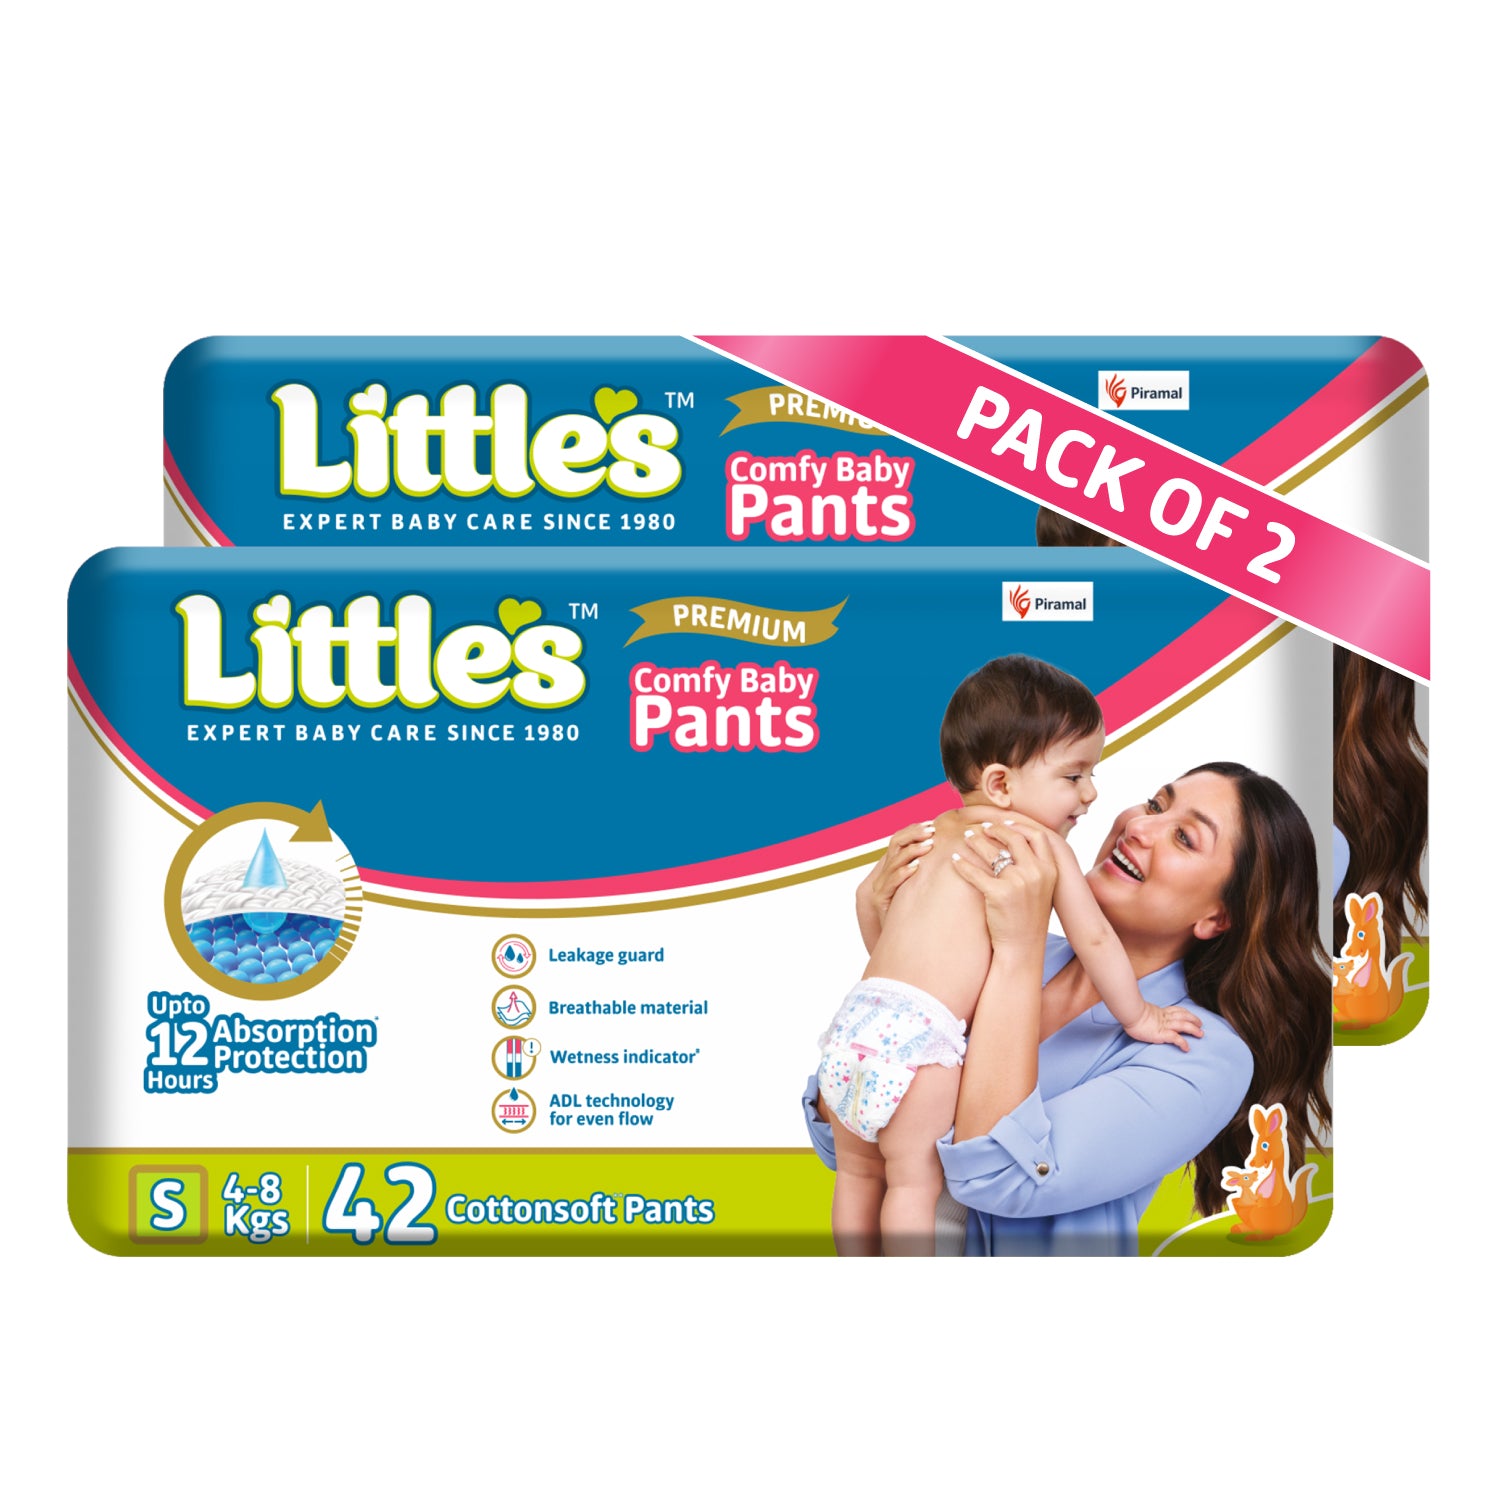 Little's Baby Pants Diapers with Wetness Indicator & 12 Hours Absorption, cottonsoft pants diaper SMALL pack of 2